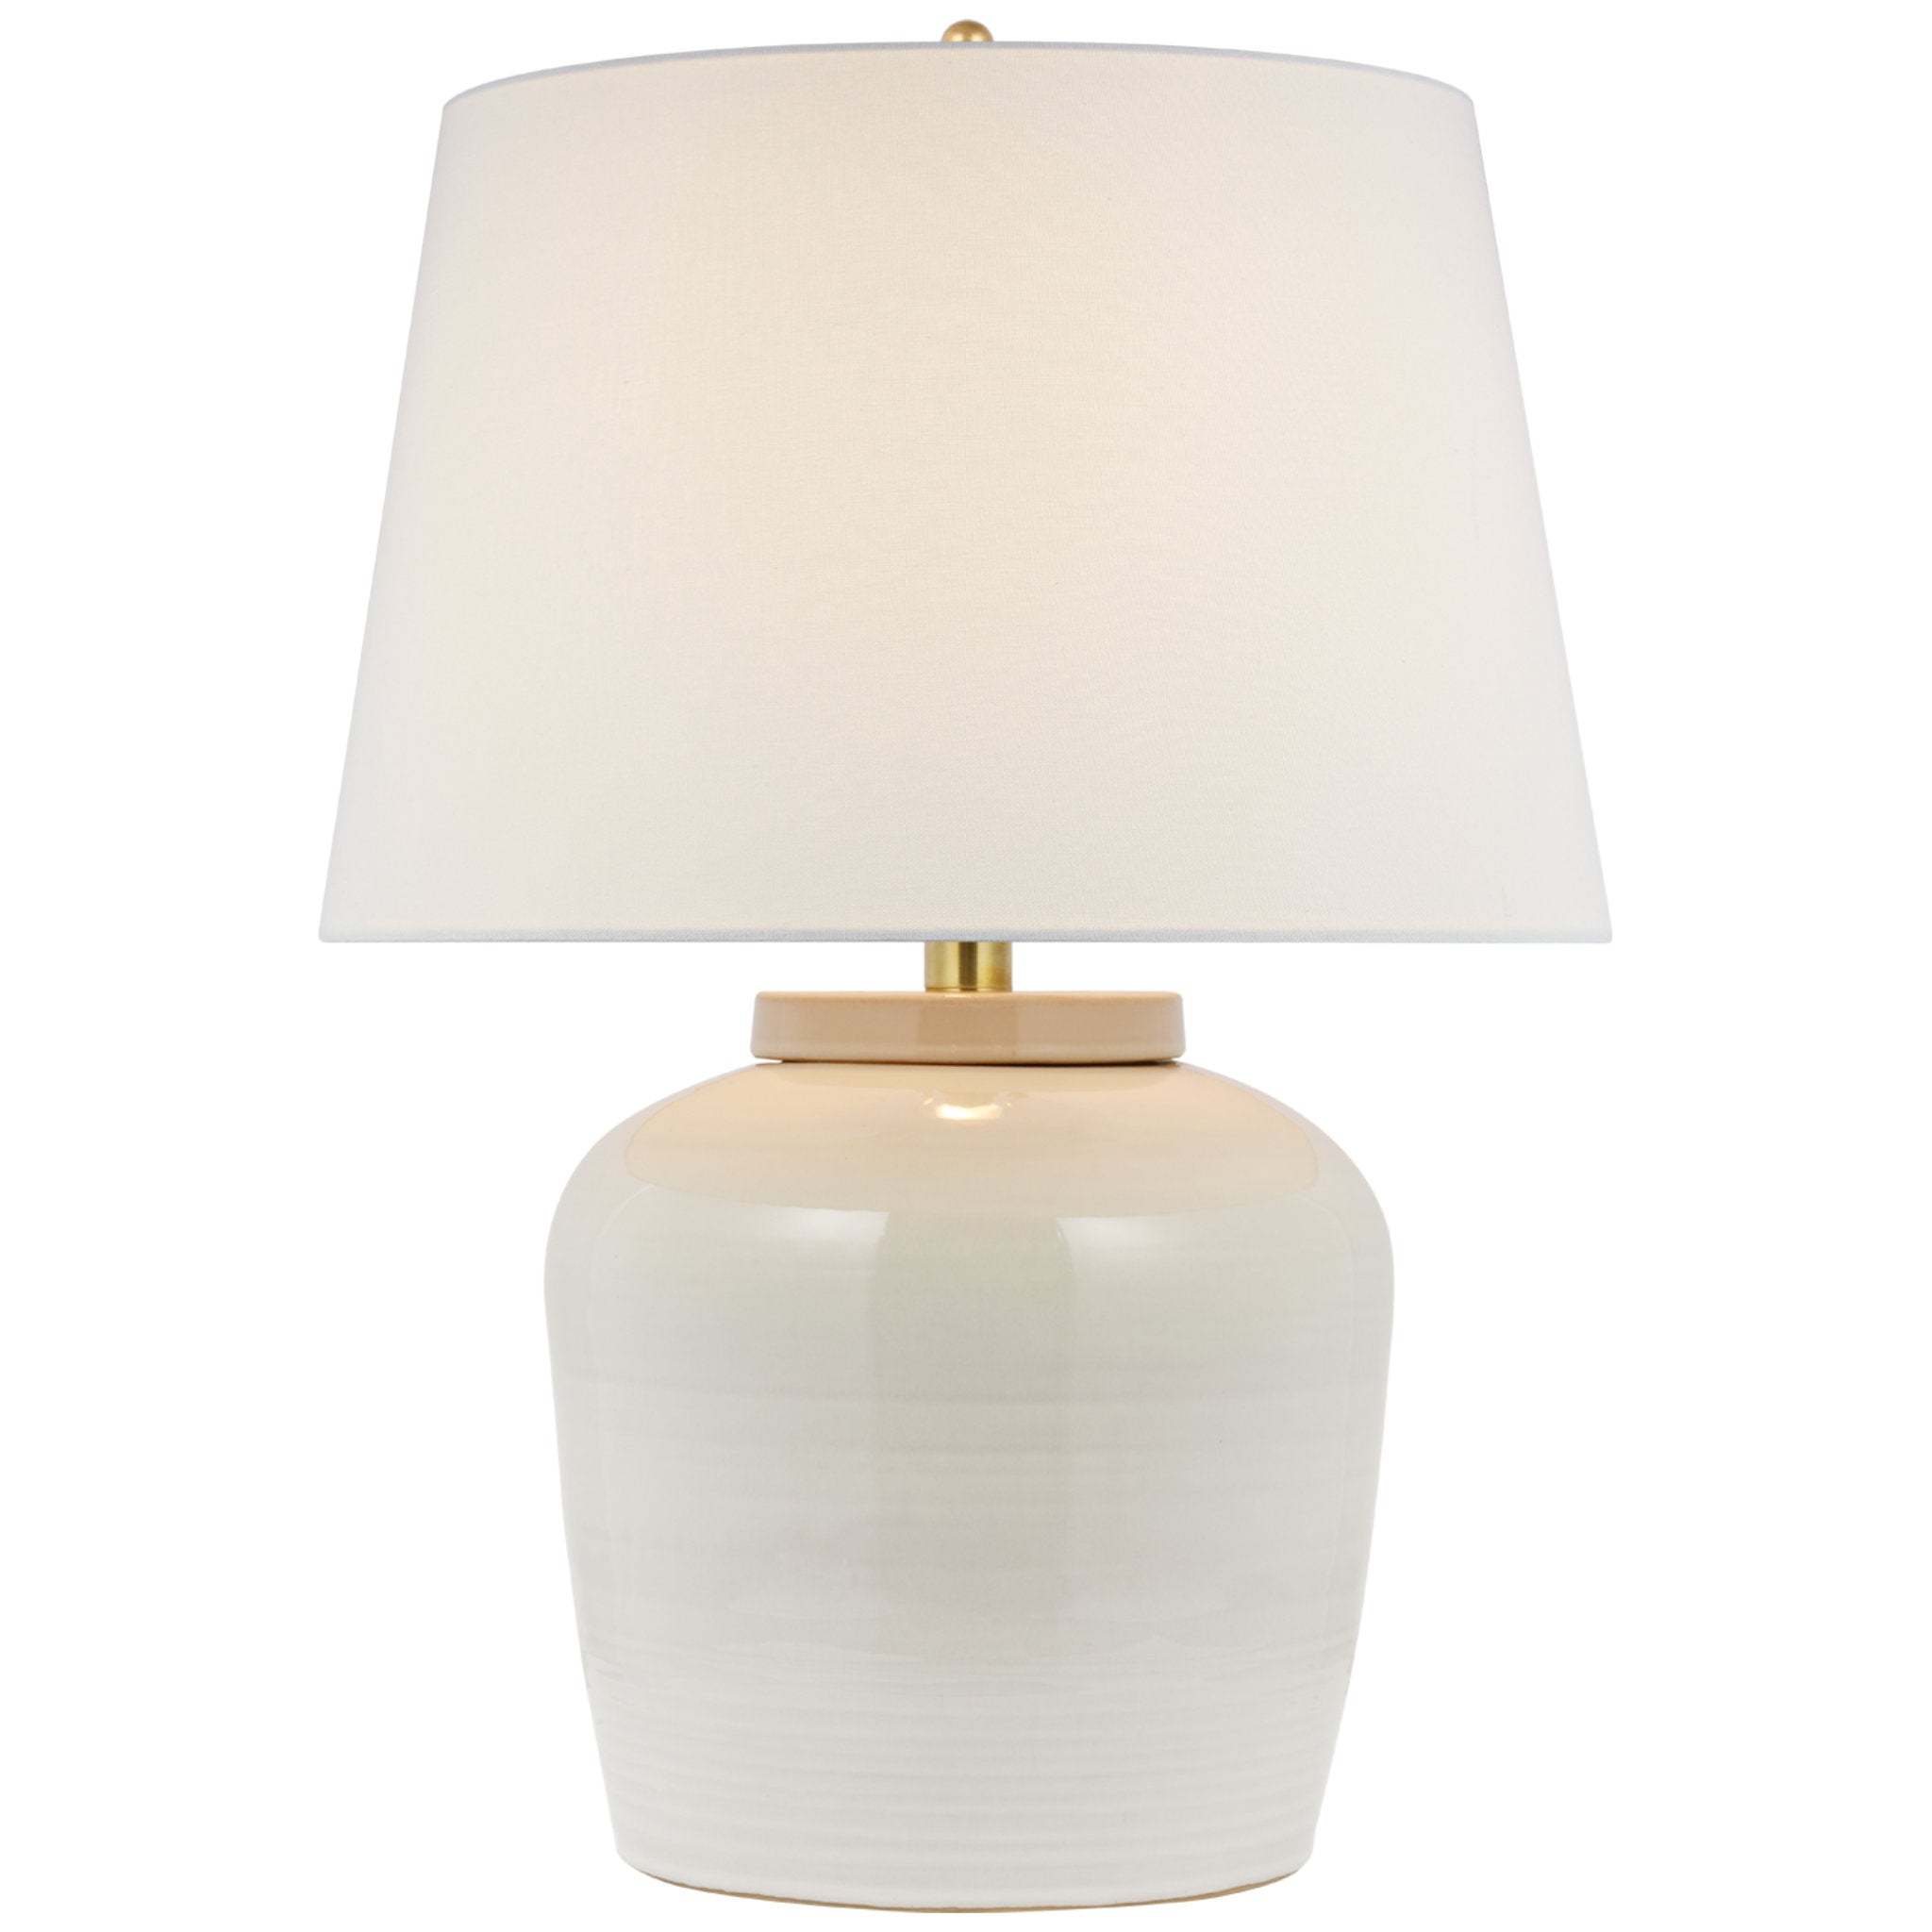 Marie Flanigan Nora Medium Table Lamp in Ivory with Linen Shade